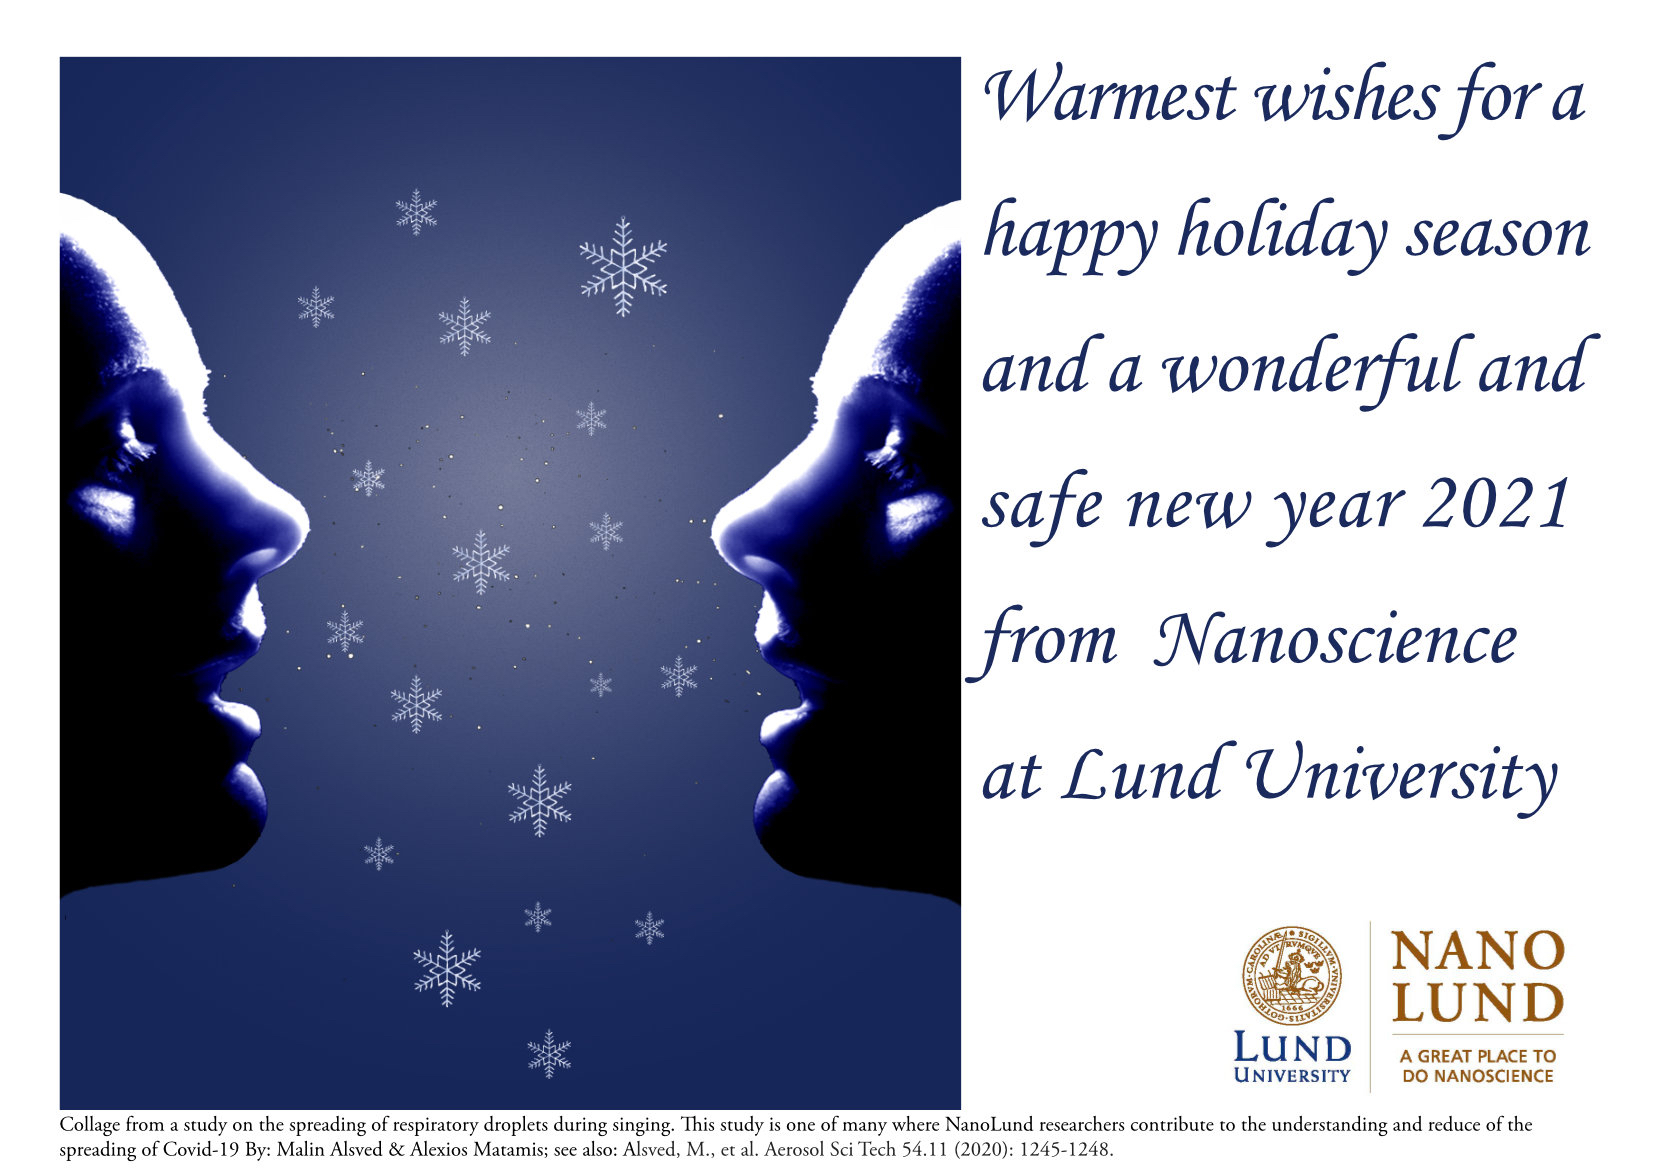 2020 Holiday card from NanoLund